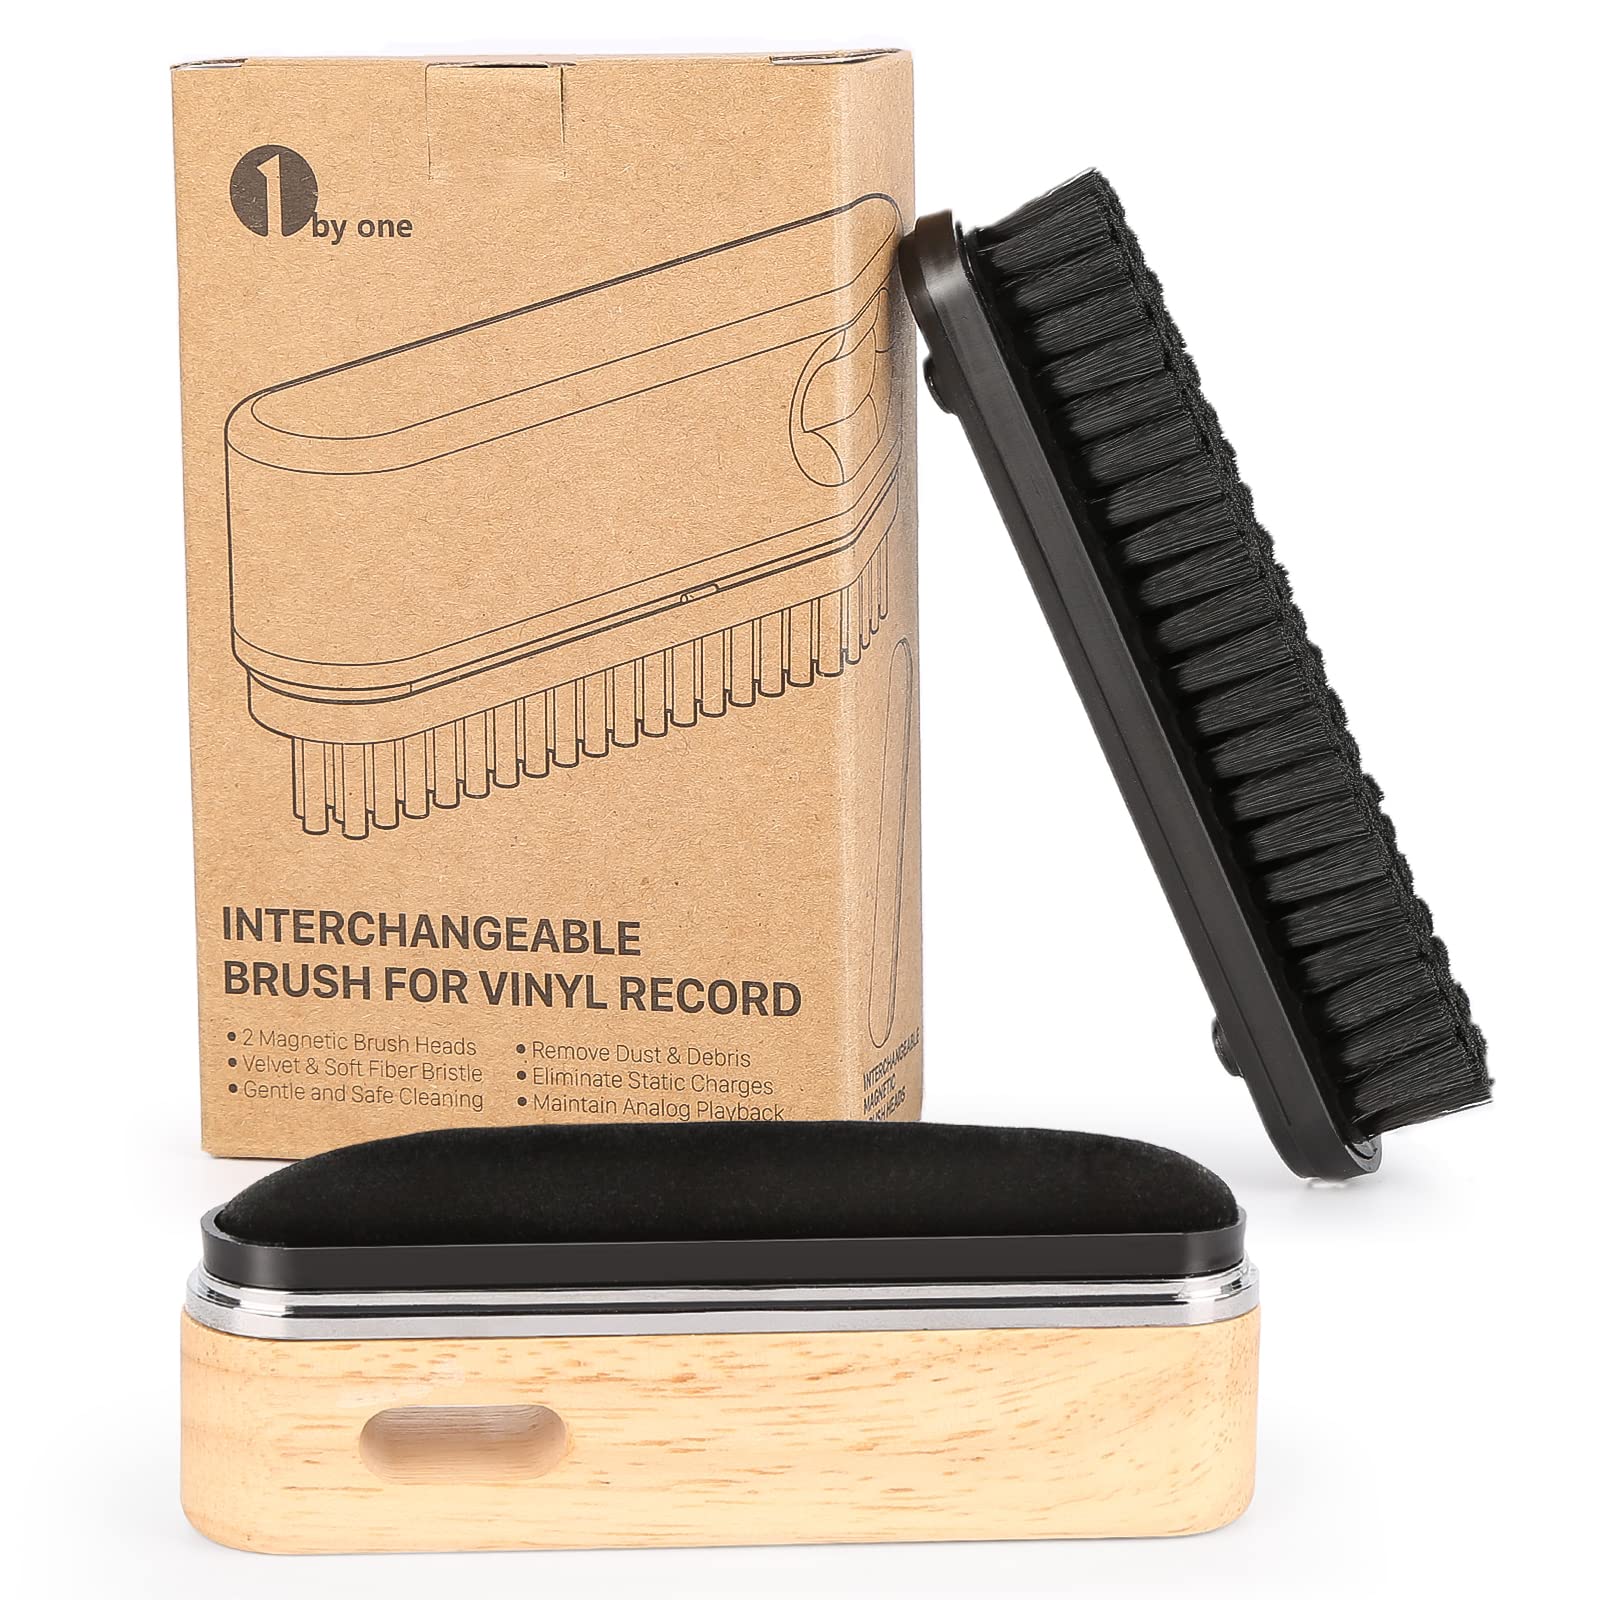 1 BY ONE Vinyl Record Cleaner Brush, Anti-Static Clean Brush for LP, Record Cleaning with Velvet & Soft Fiber Record Brush, Interchangeable Magnetic Brush Heads